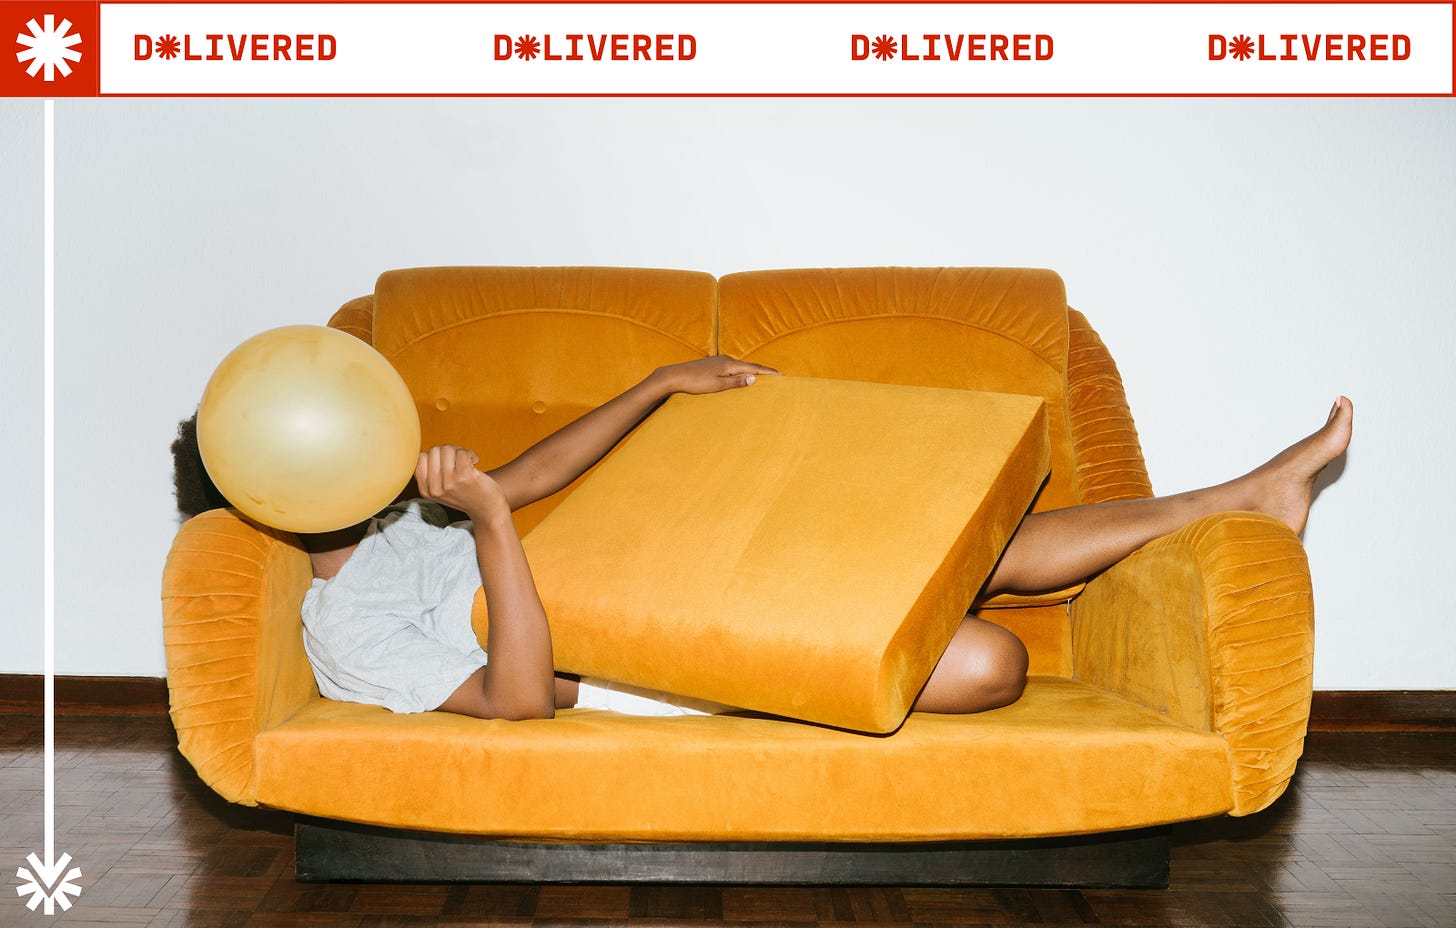 A person of colour is relaxing on a bright orange couch and covers their face with a golden balloon.